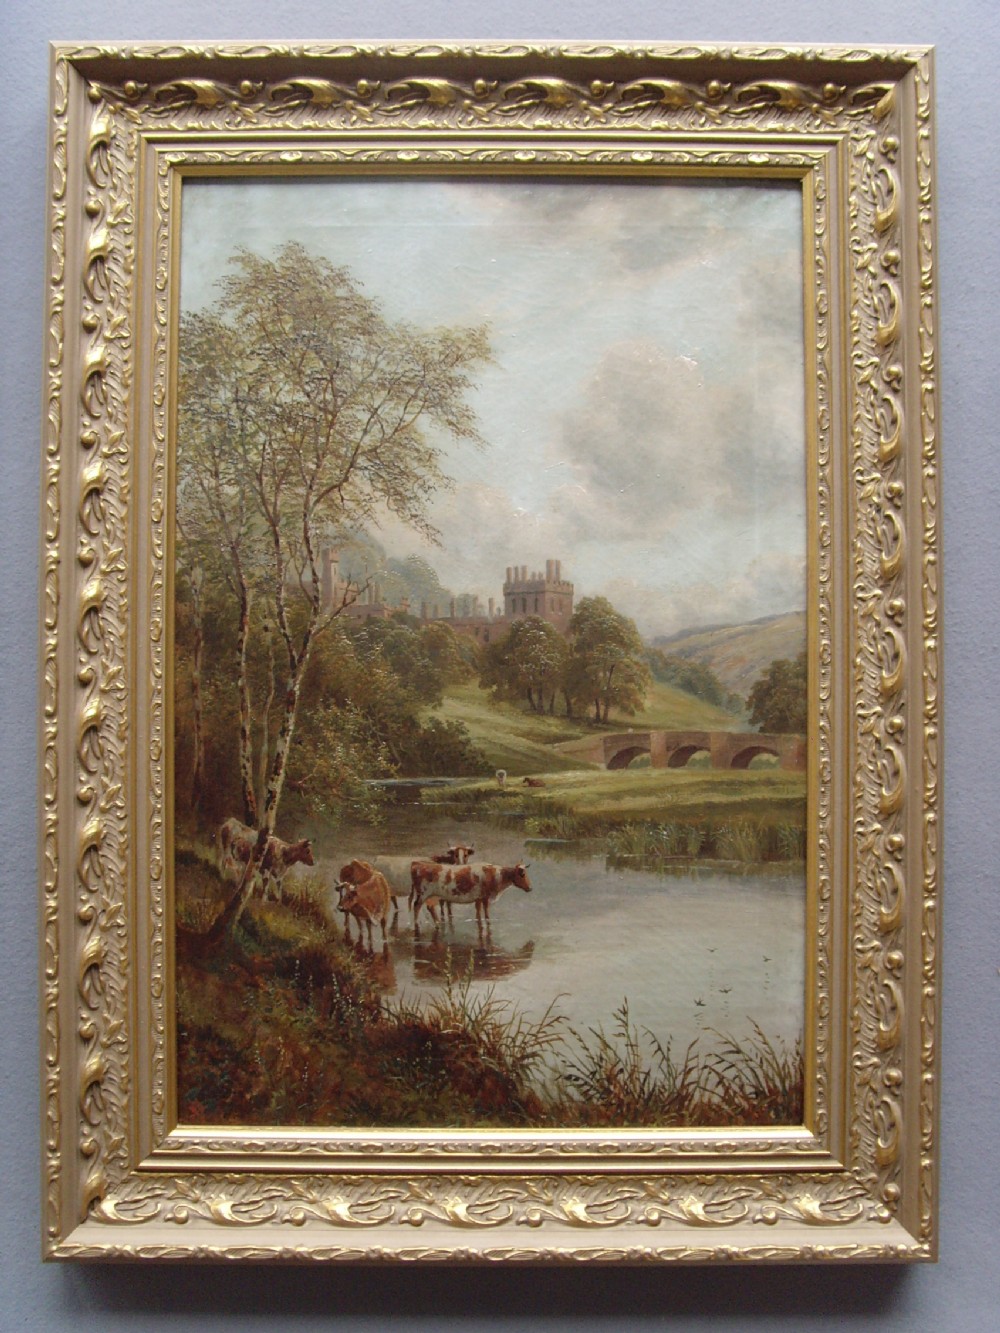 19thc oil painting haddon hall cattle watering river wye below haddon hall derbyshire by artist albert dunington one of a pair offered separately